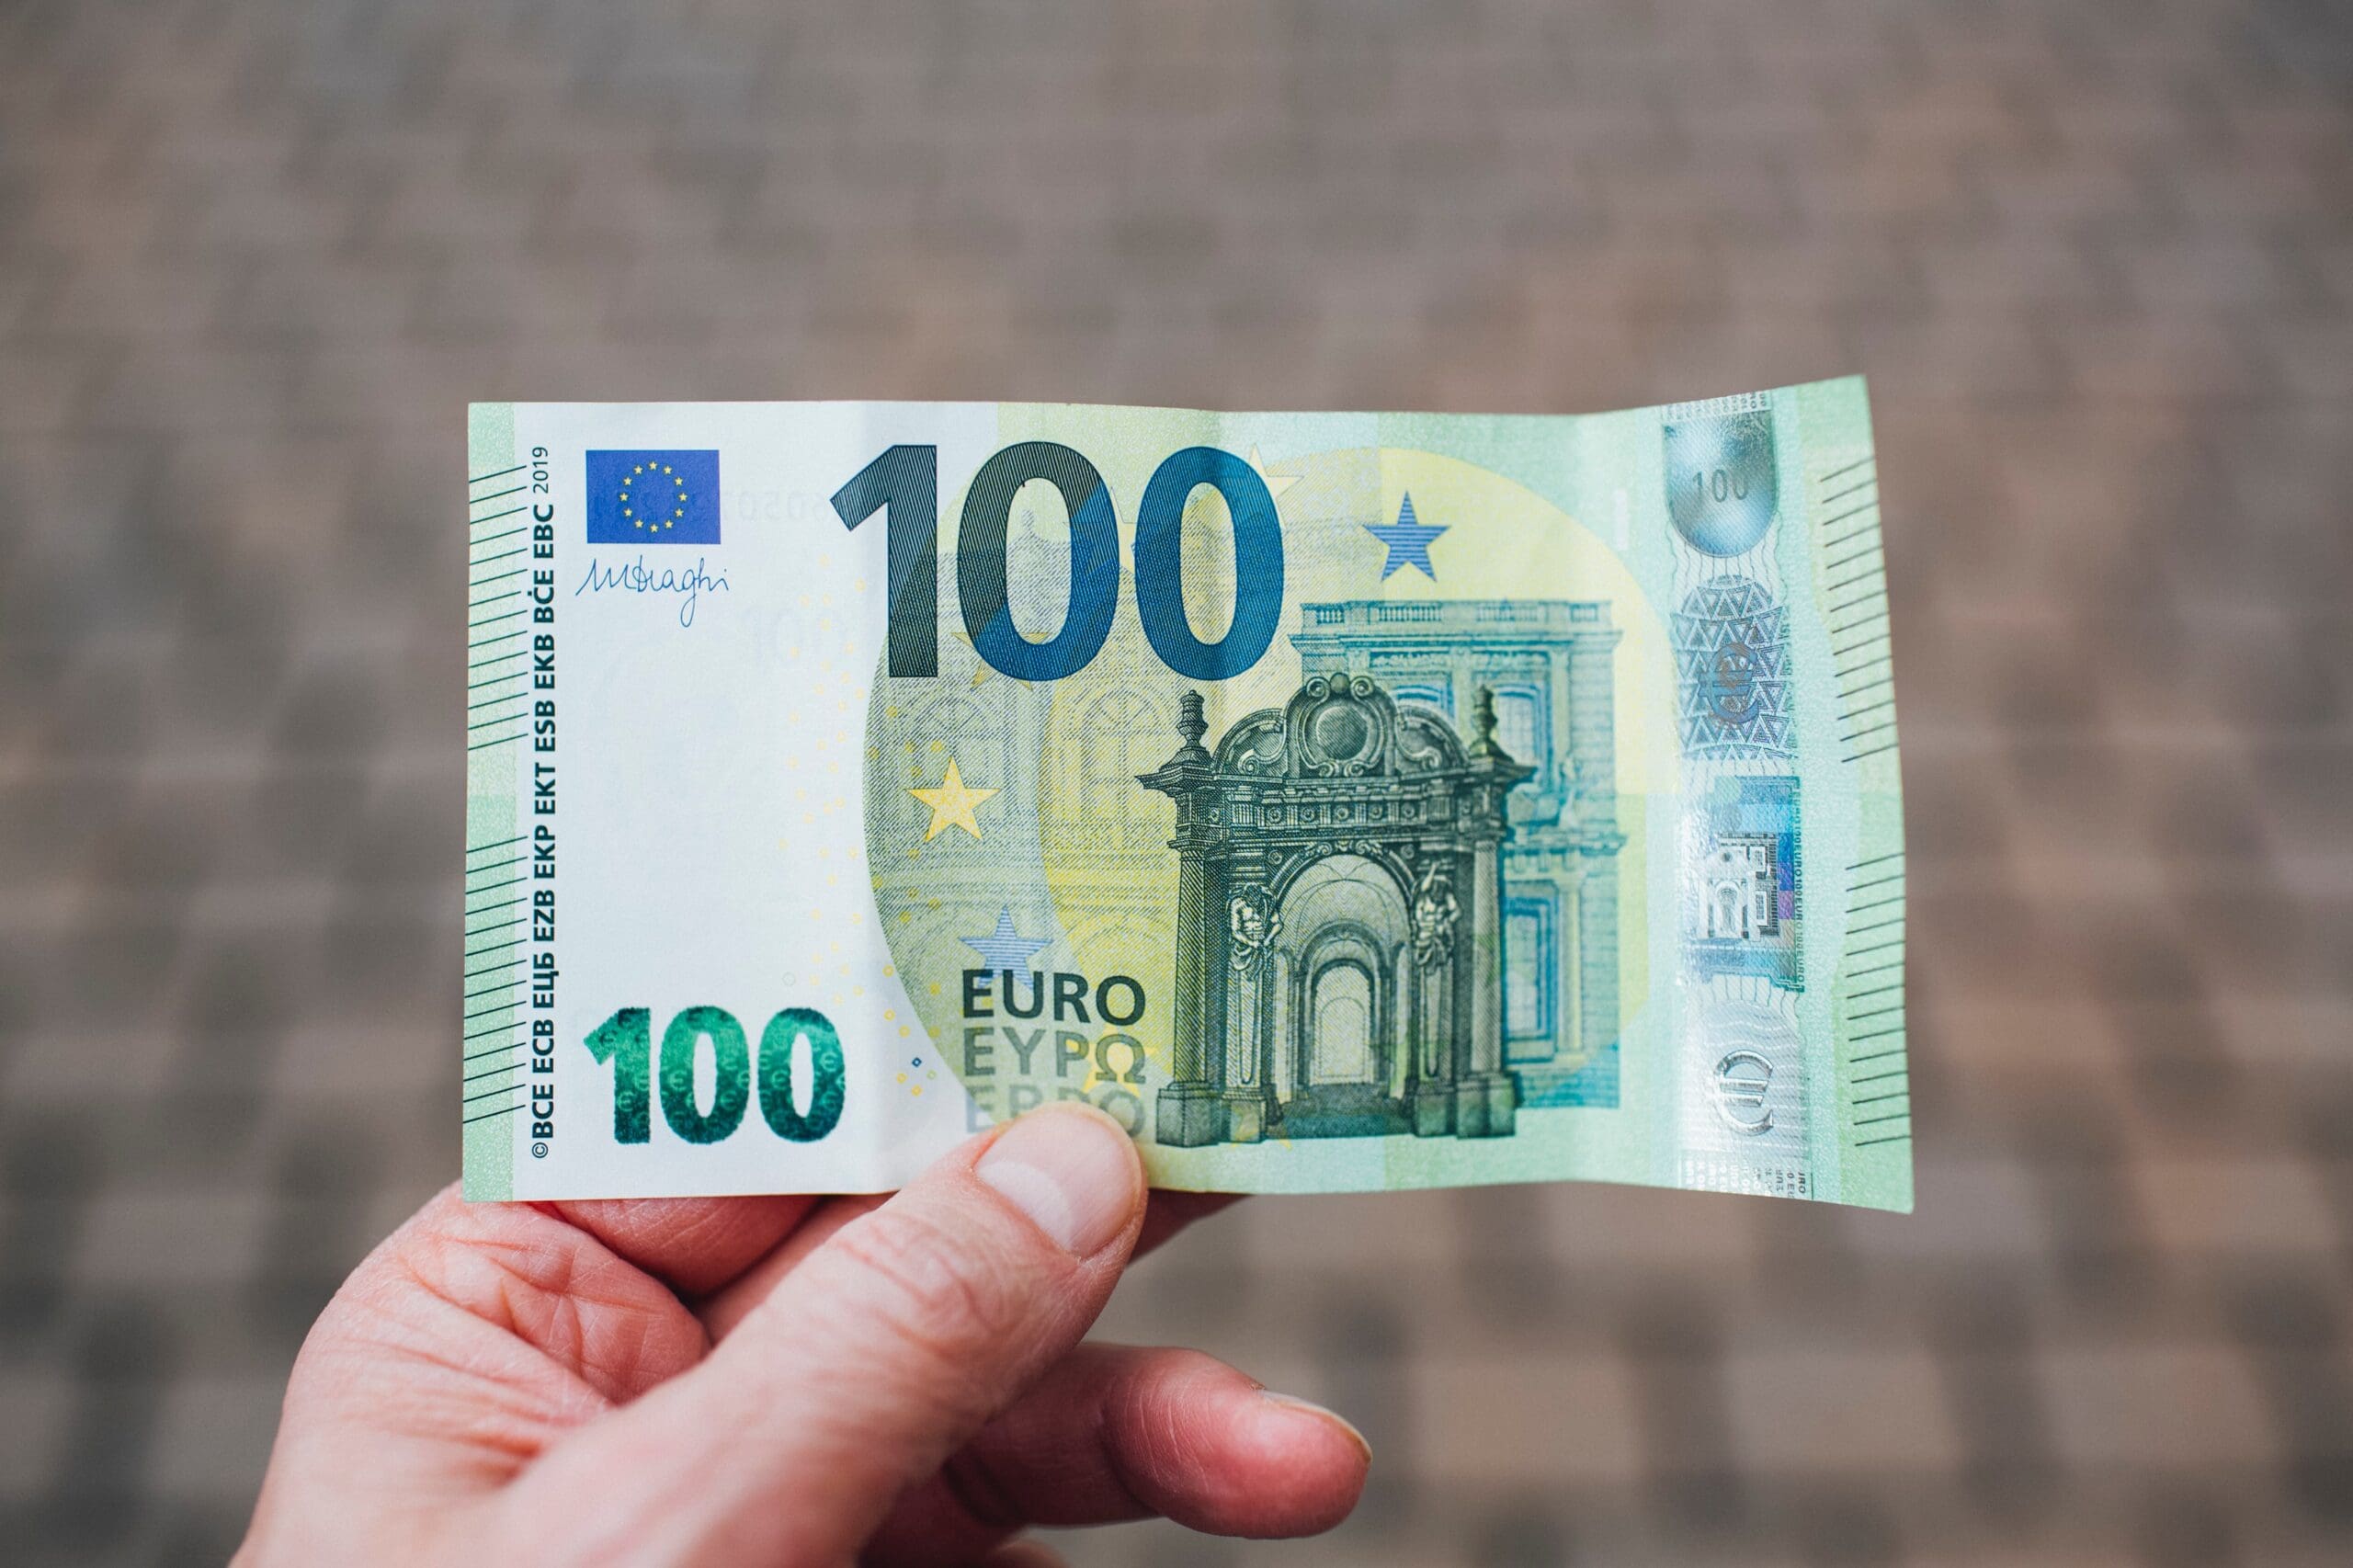 Cash 100 € EURO EUR banknote money with security features and watermark